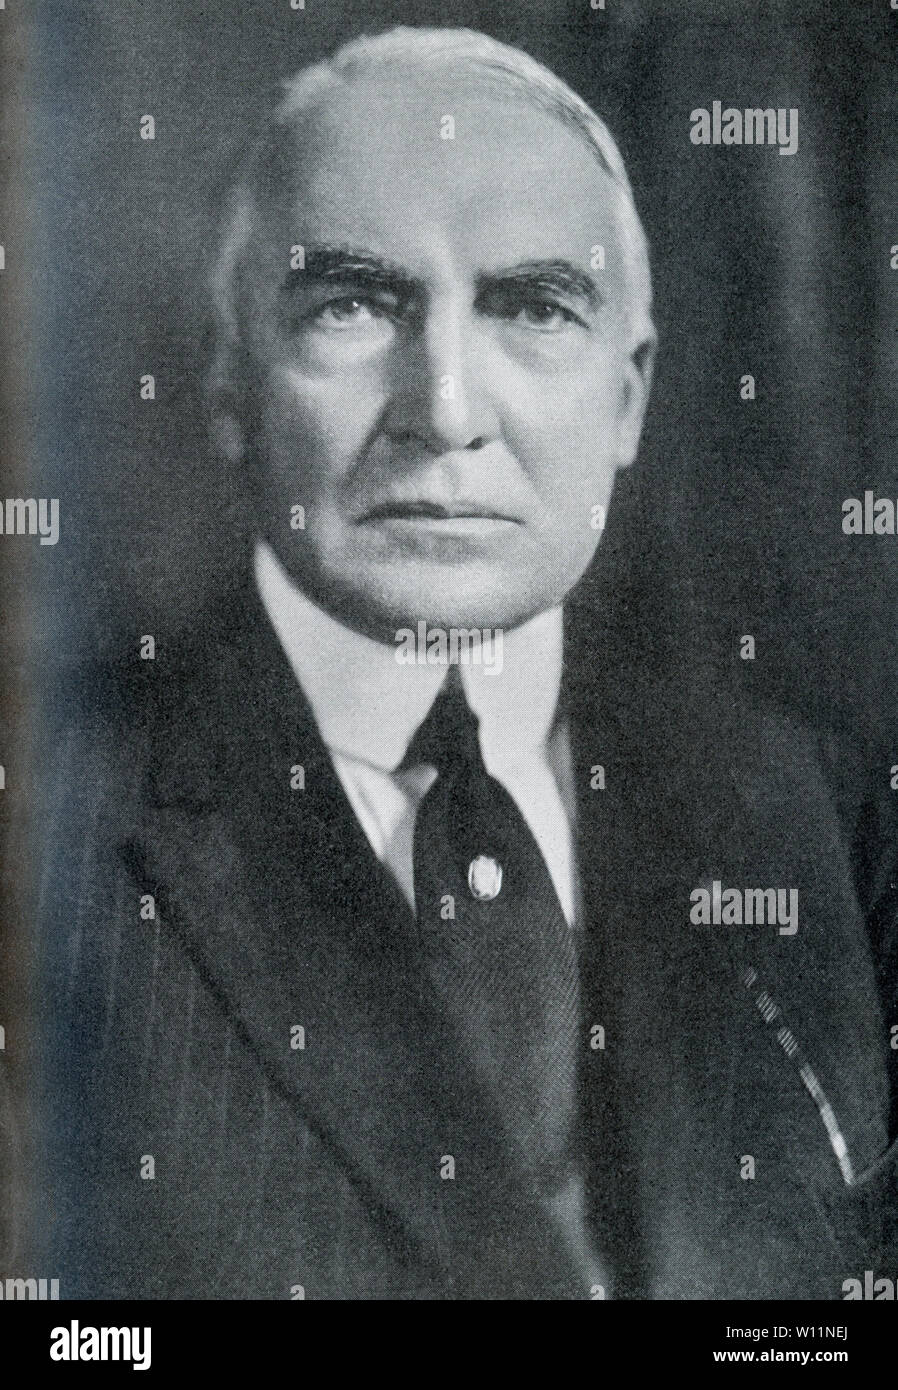 This photo dates to the 1920s and shows the 29th President of the United States, Warren Gamaliel Harding, who served as president from 1921-1923. Stock Photo